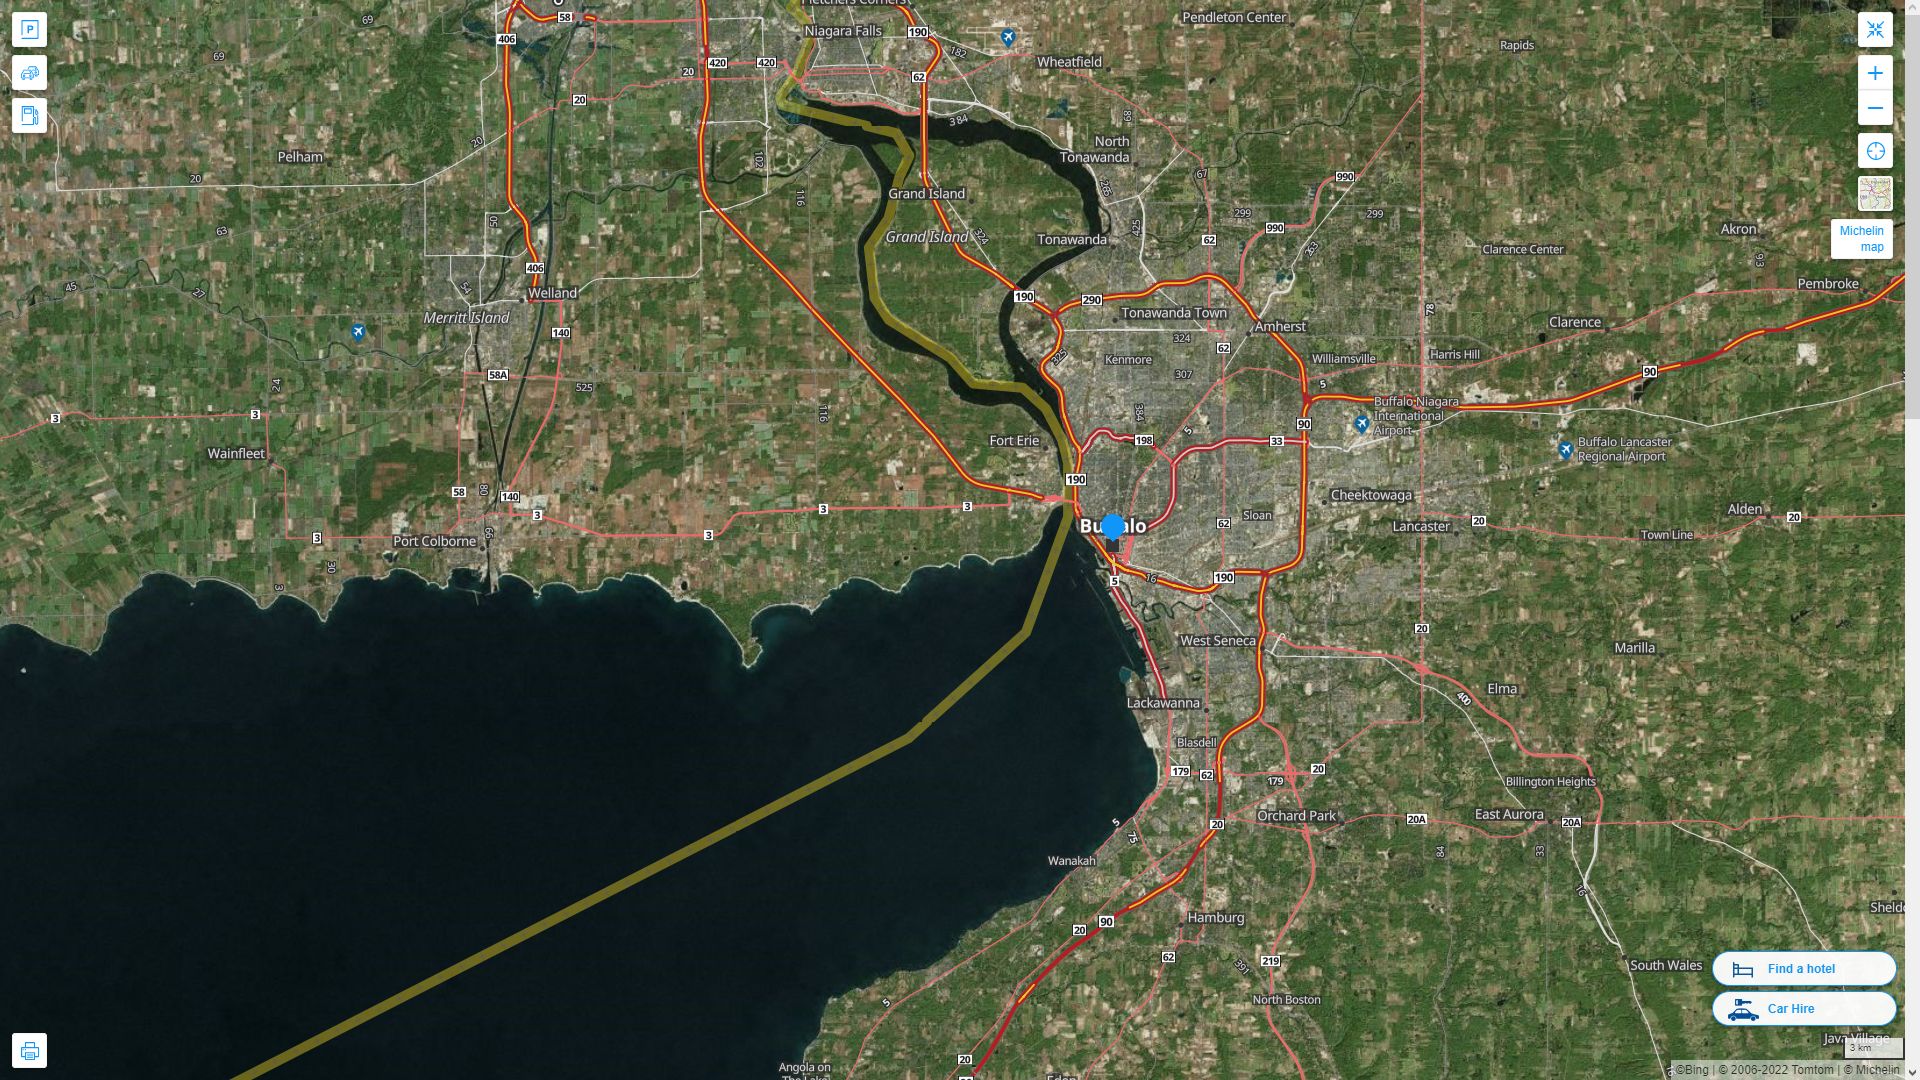 Buffalo New York Highway and Road Map with Satellite View